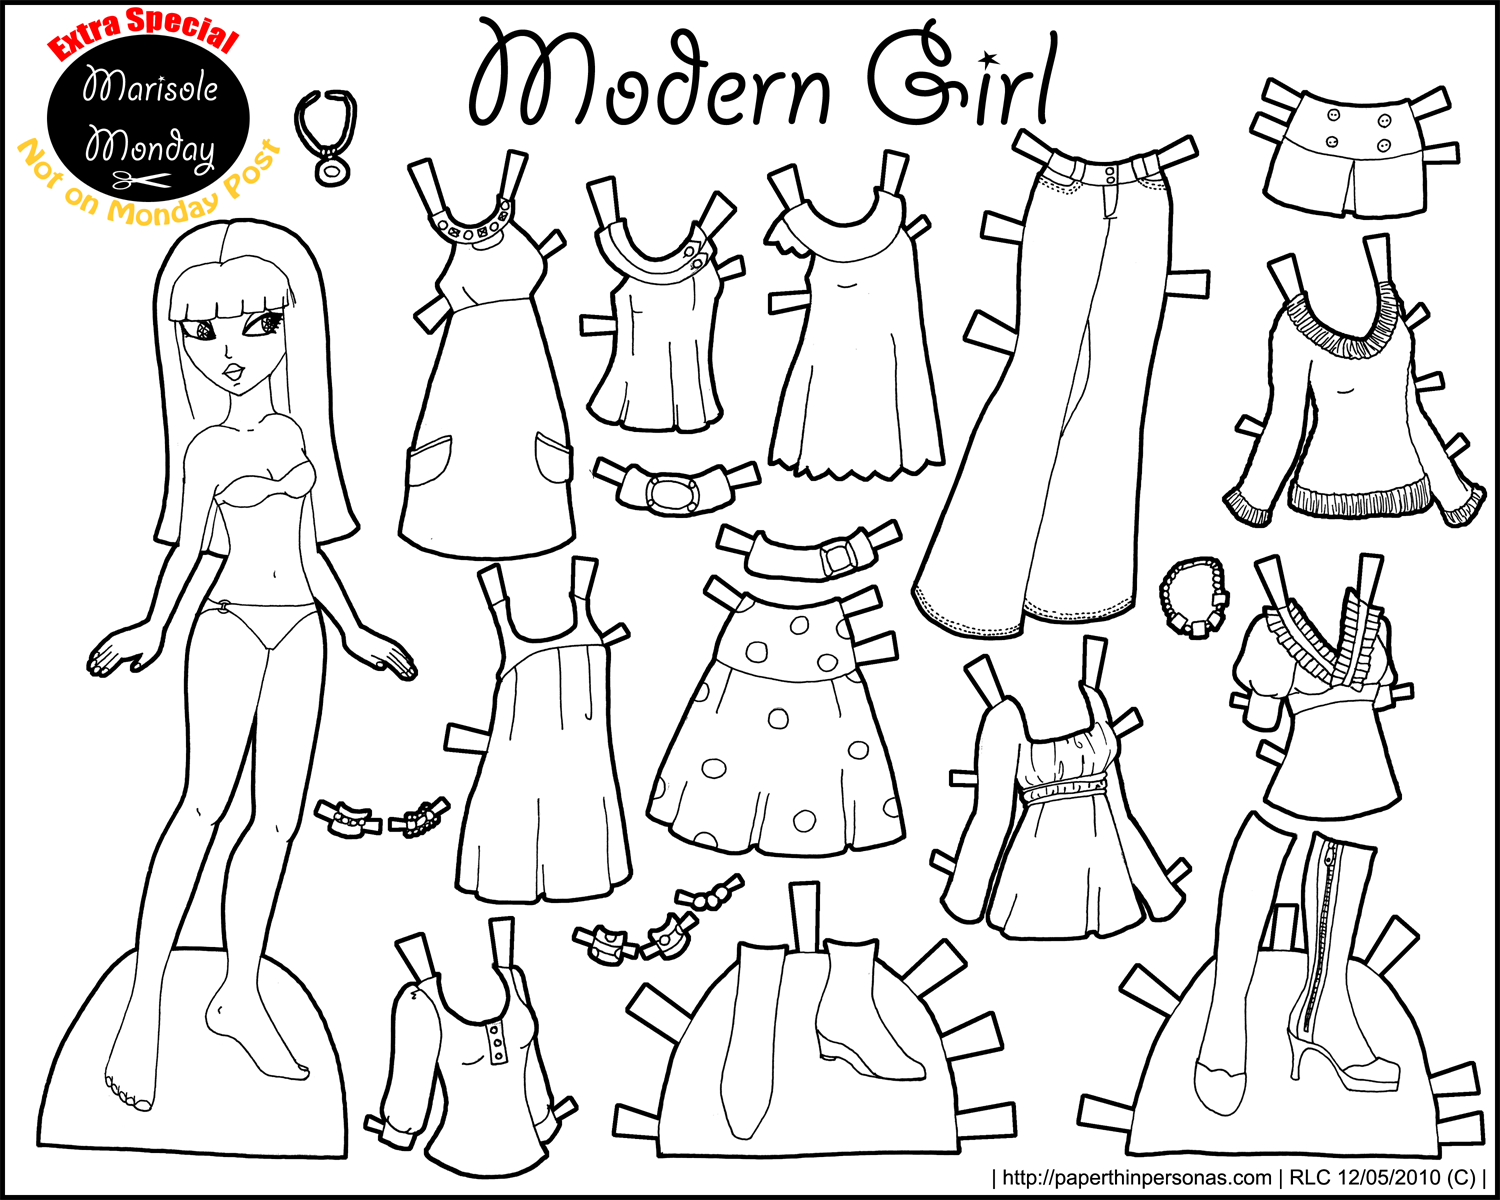 https://paperthinpersonas.com/wp-content/uploads/2016/01/paper-doll-printable-marisole-black-and-white-150.png